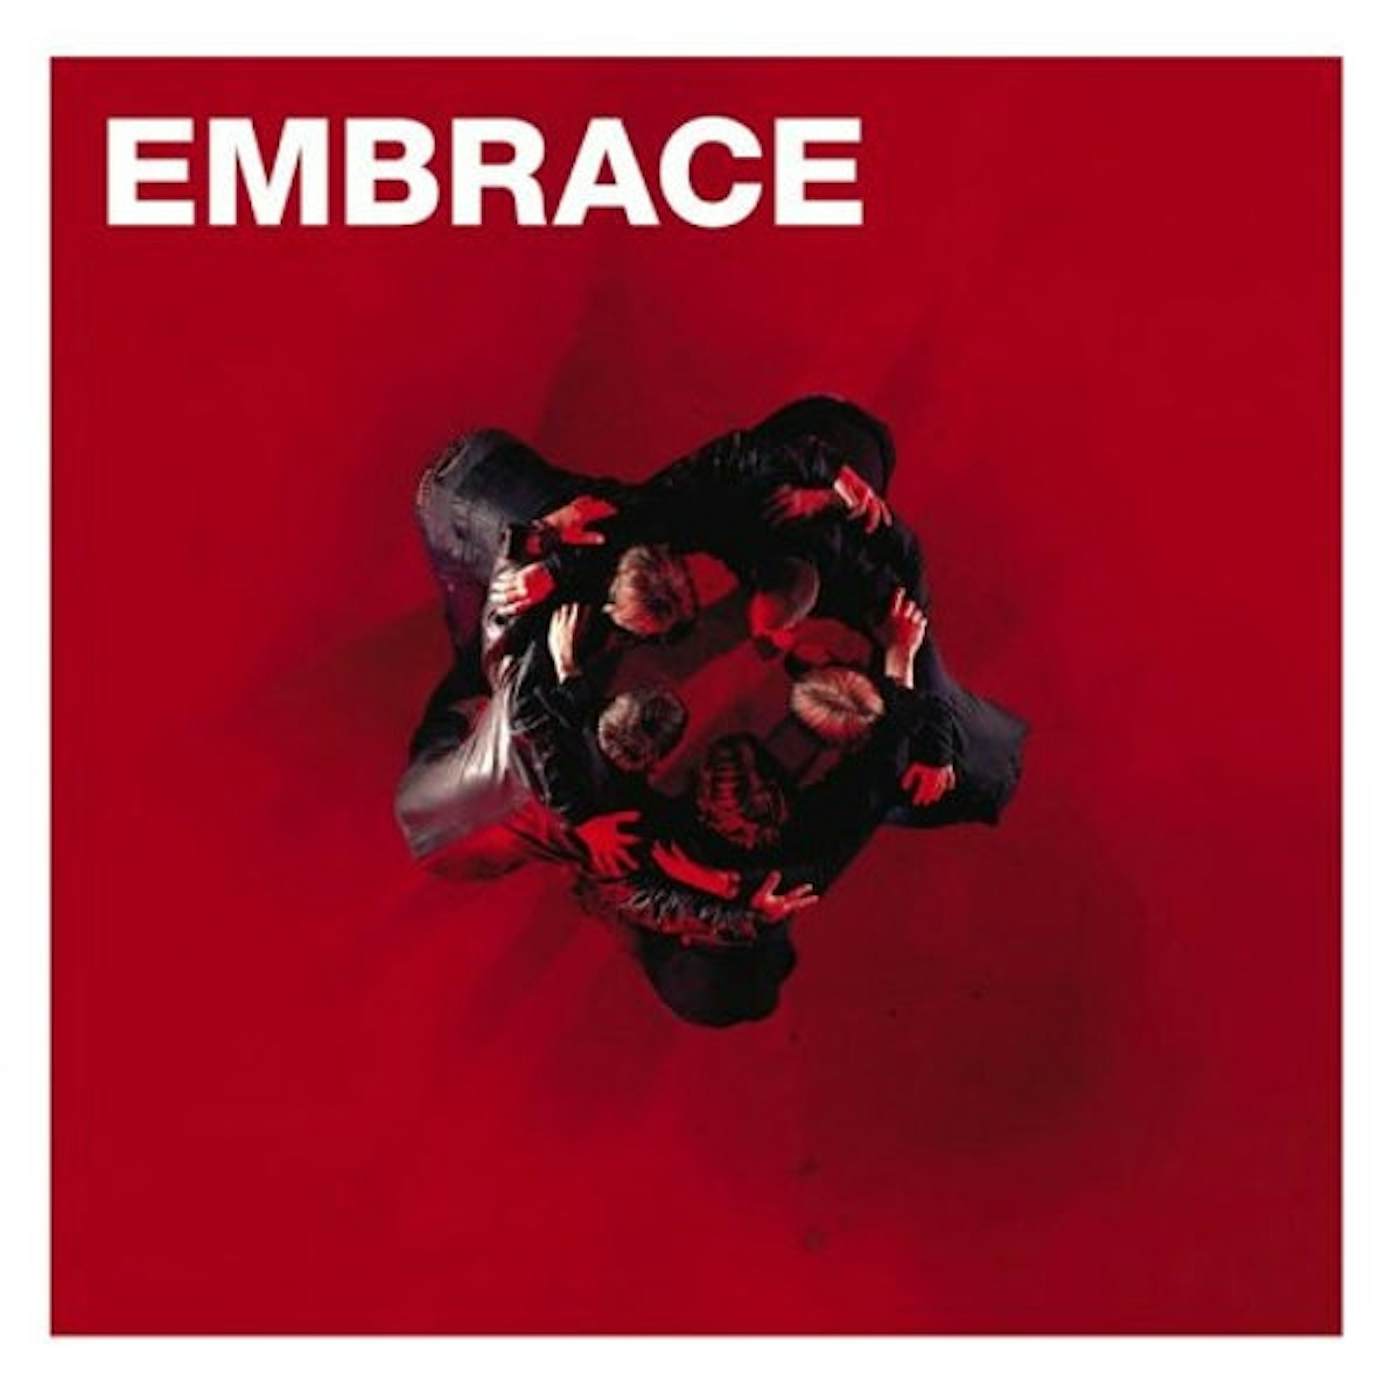 Embrace Out Of Nothing Vinyl Record